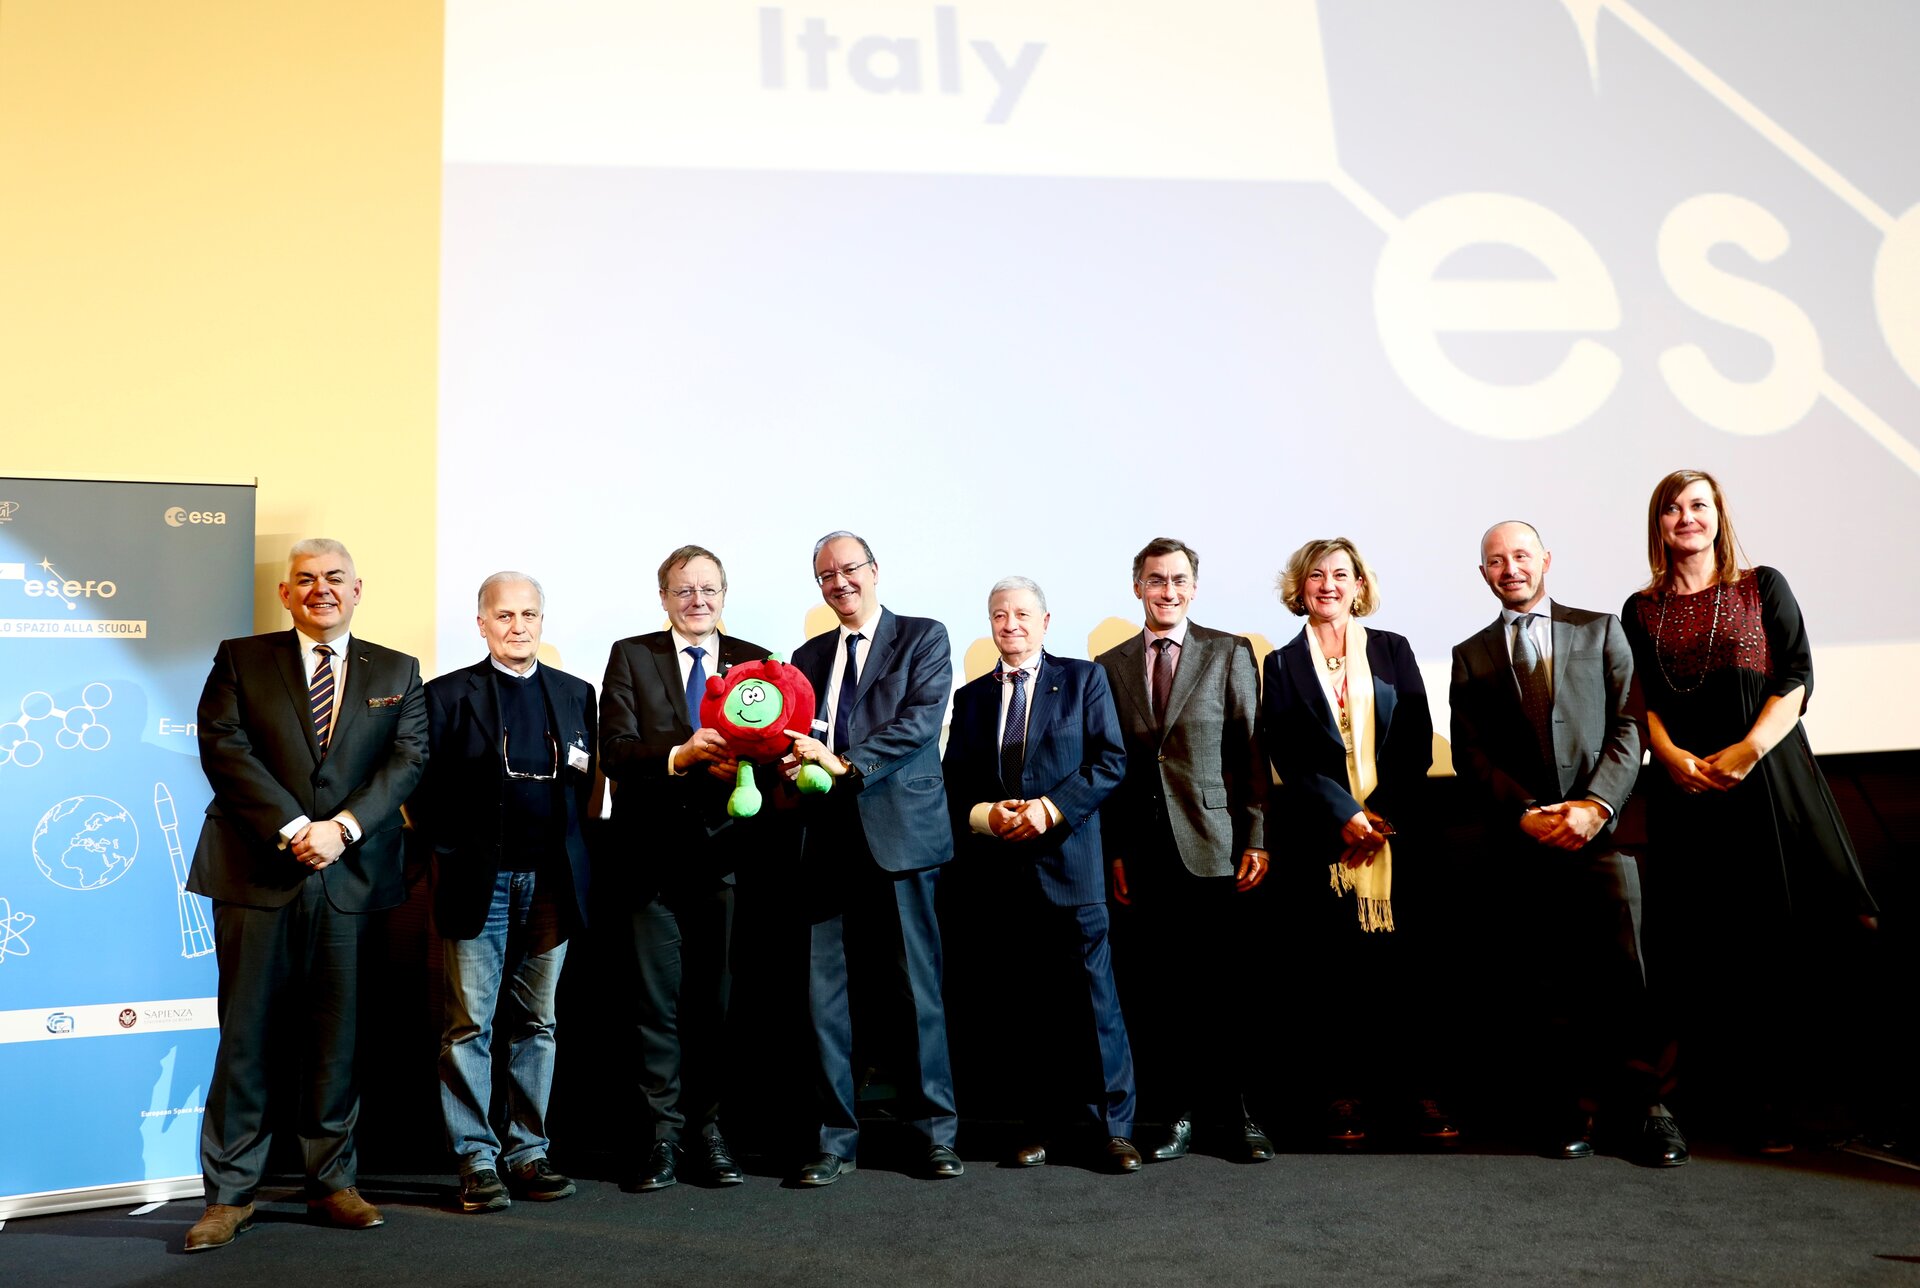 ESERO Italy official launch event 